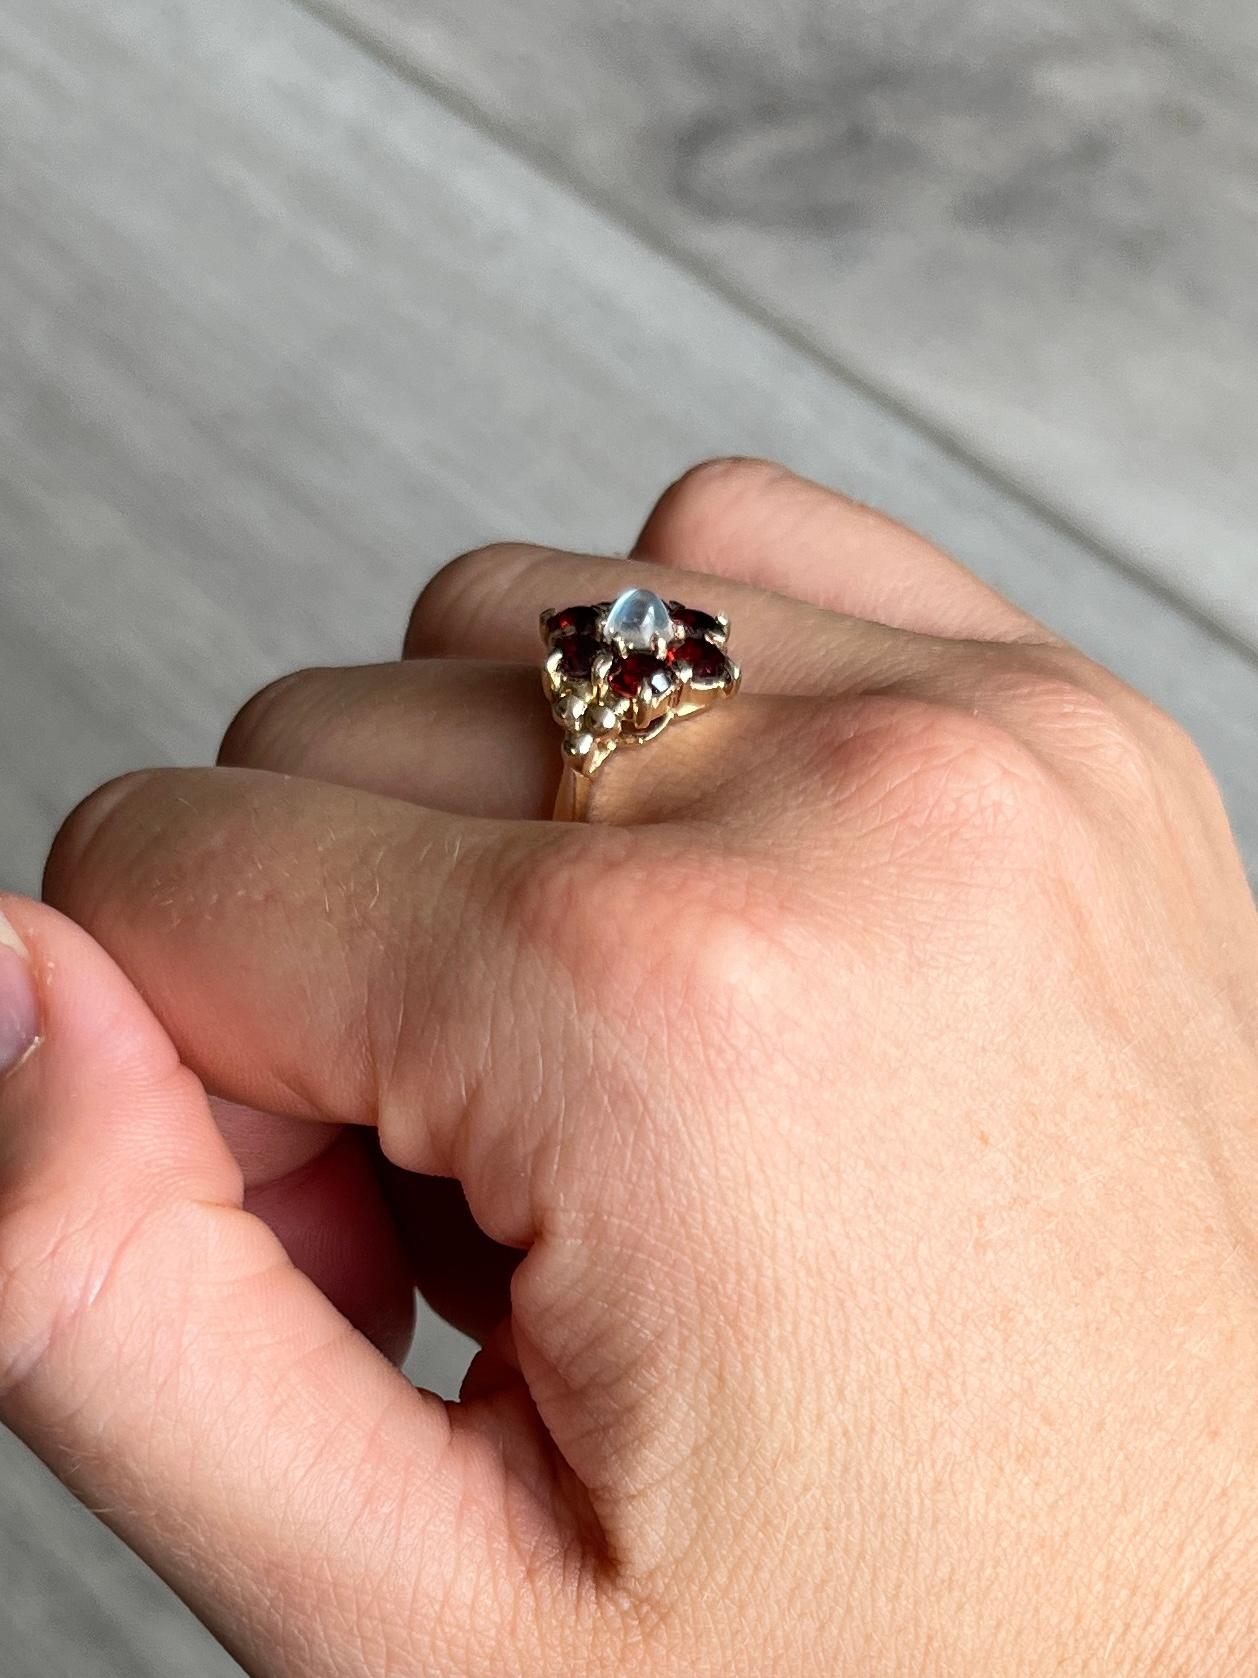 This striking ring holds round cut garnets totalling approx 1.5ct and a moonstone at the centre. All the stones sit in 9carat gold claws. 

Ring Size: M or 6 1/4 
Cluster Diameter: 13mm
Height Off Finger: 6mm

Weight: 3.5g